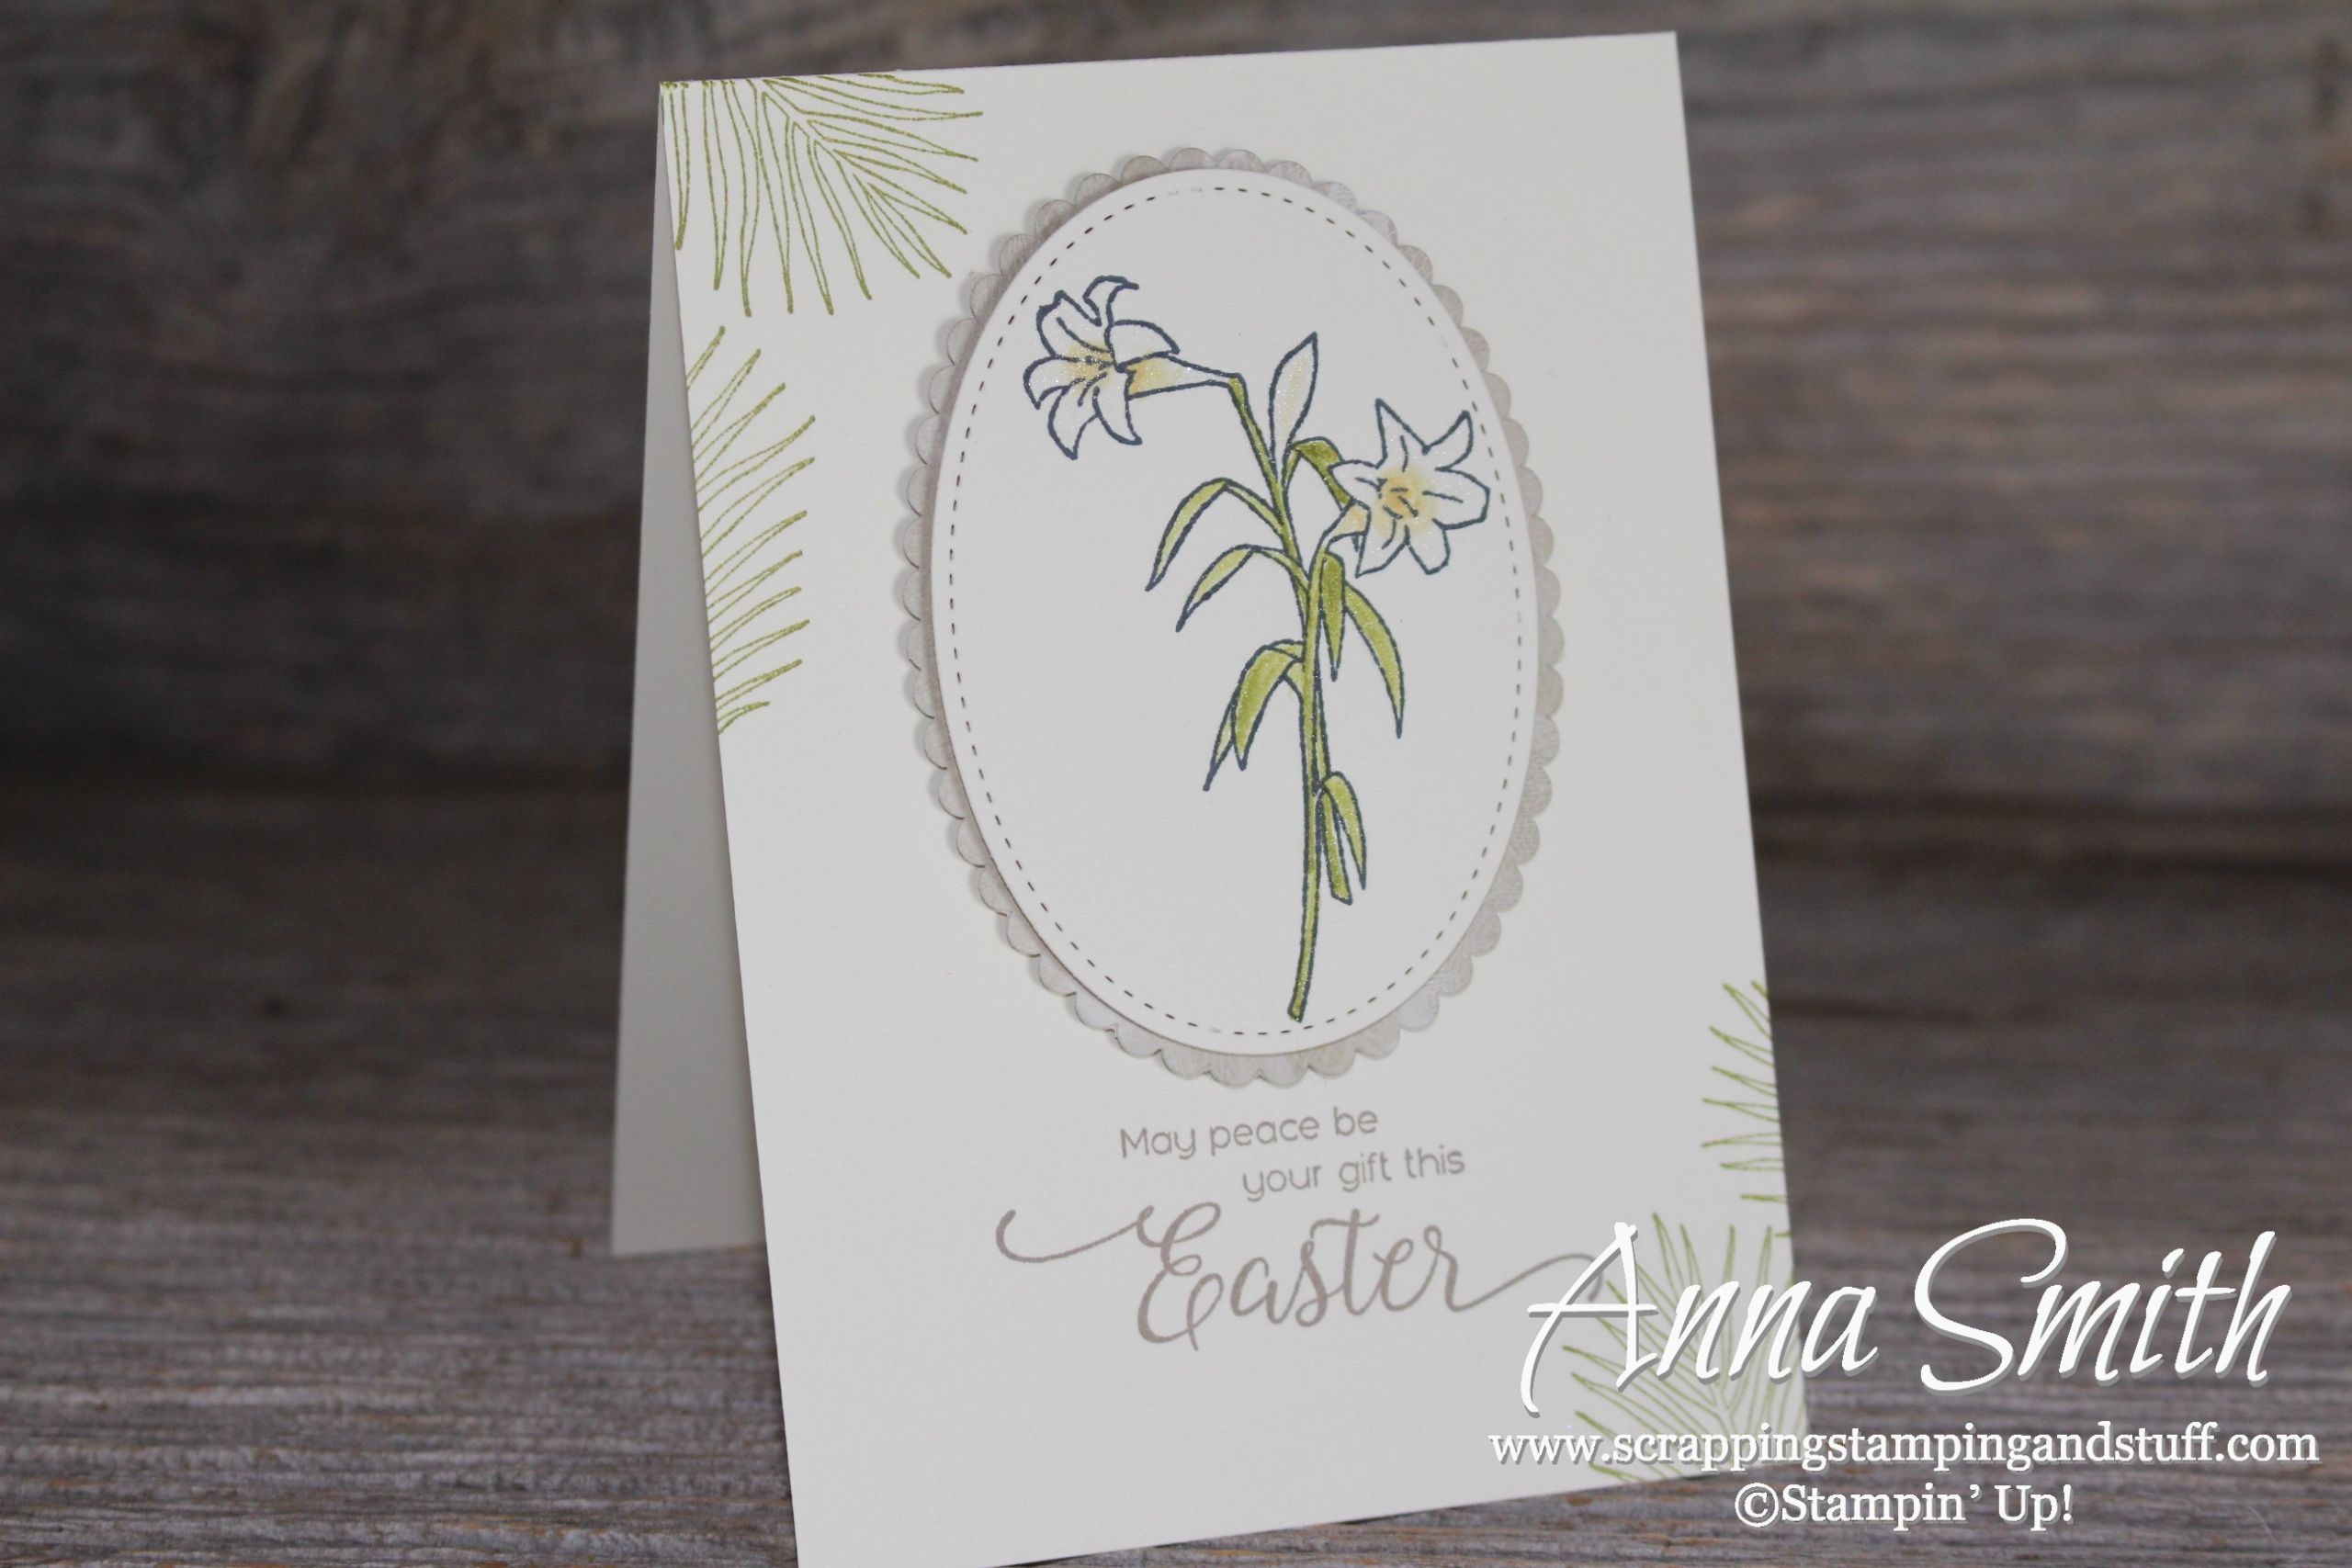 Stampin Up Easter Cards Ideas
 Stampin Up Easter Card Idea Featuring the Easter Message